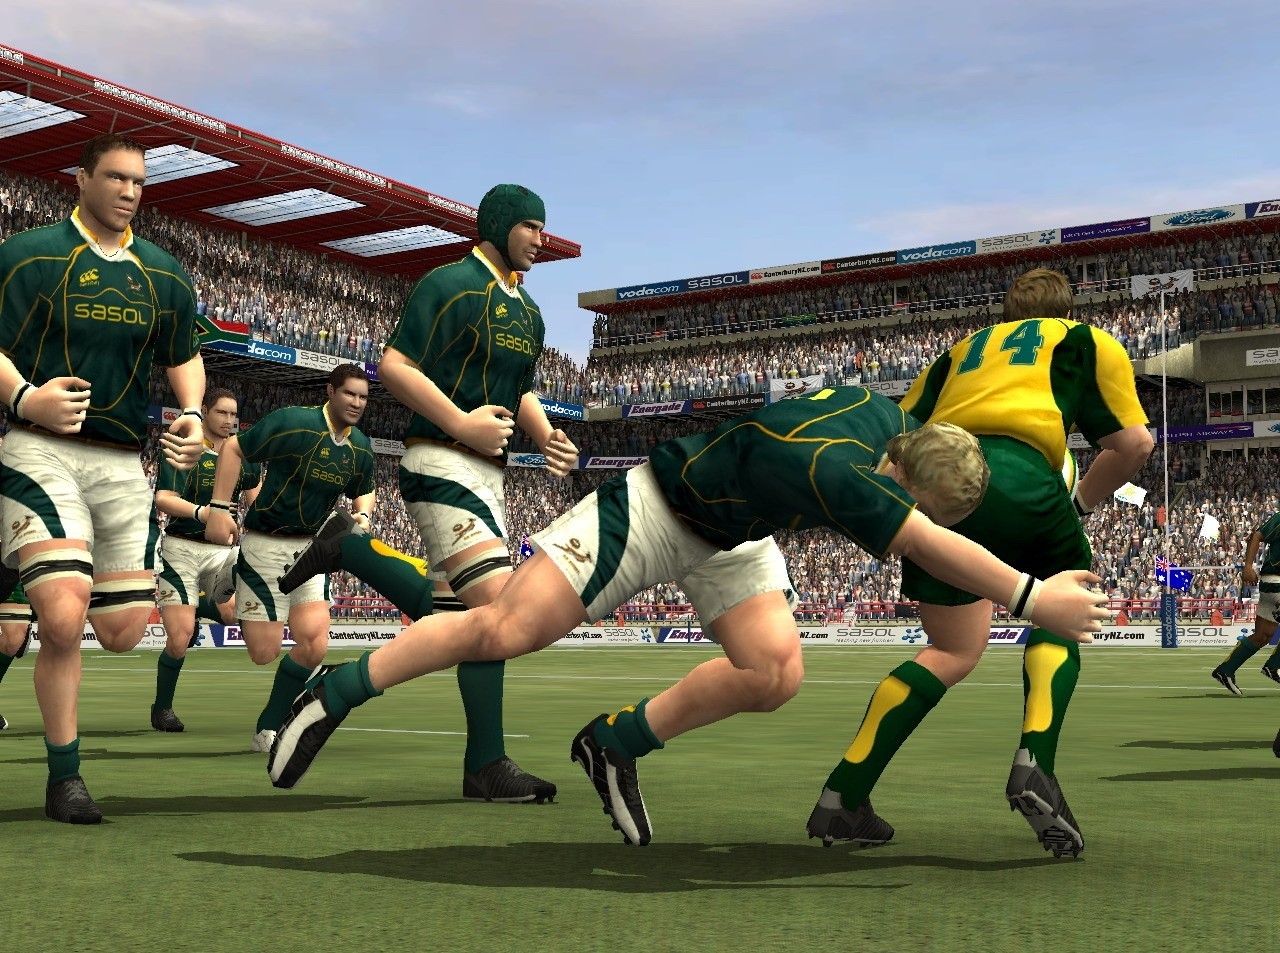 rugby 08 pc crack